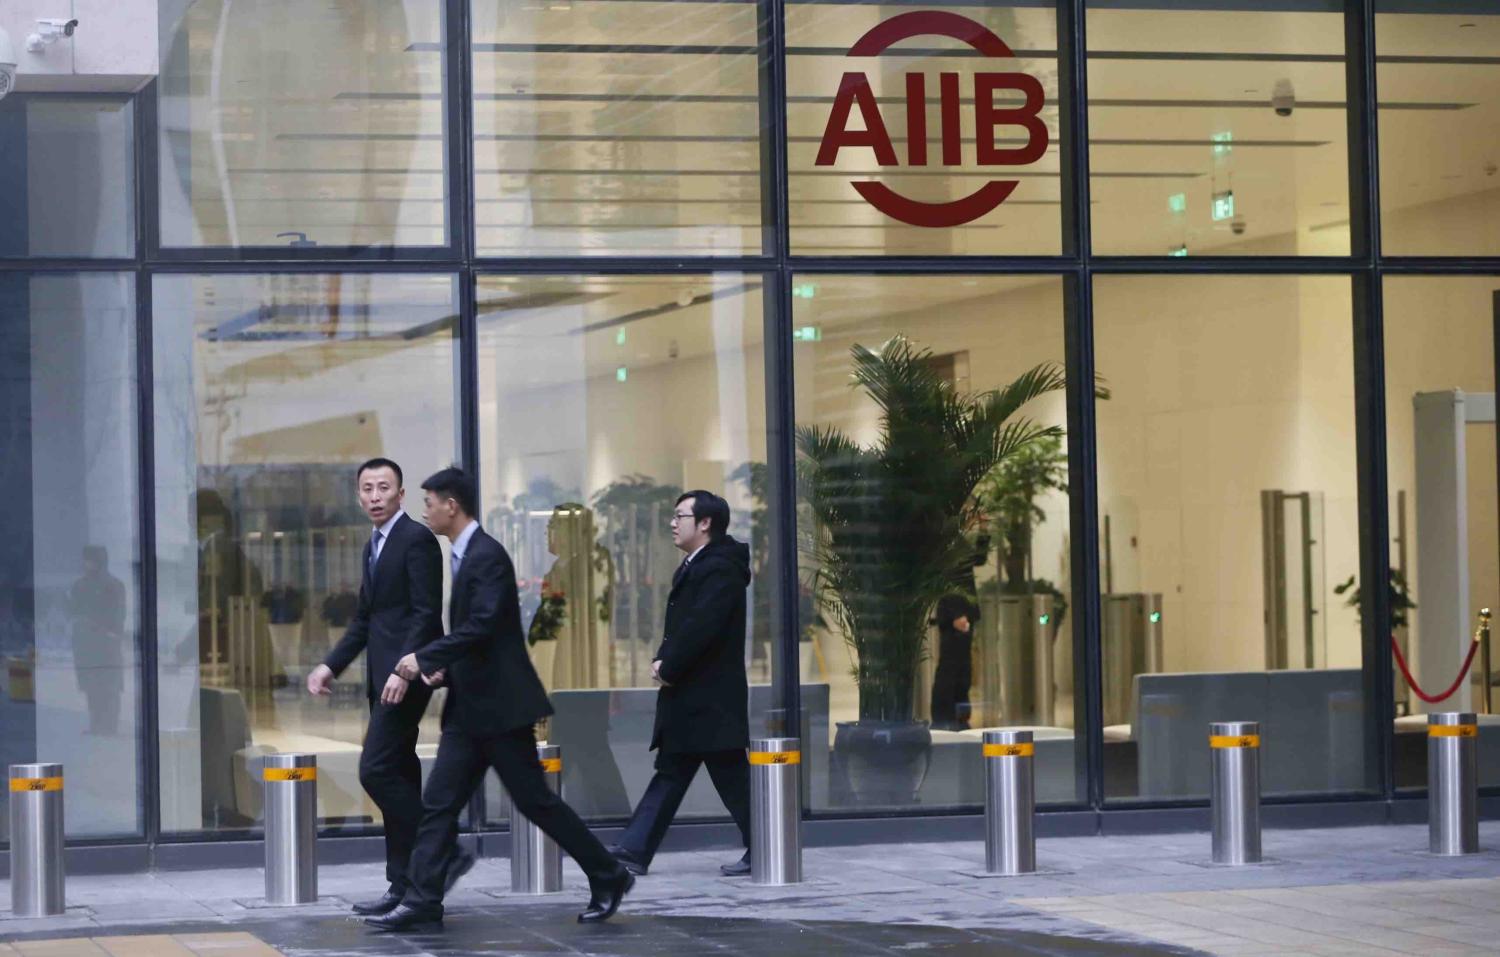 The Asian Infrastructure Investment Bank building in Beijing (VCG via Getty Images)